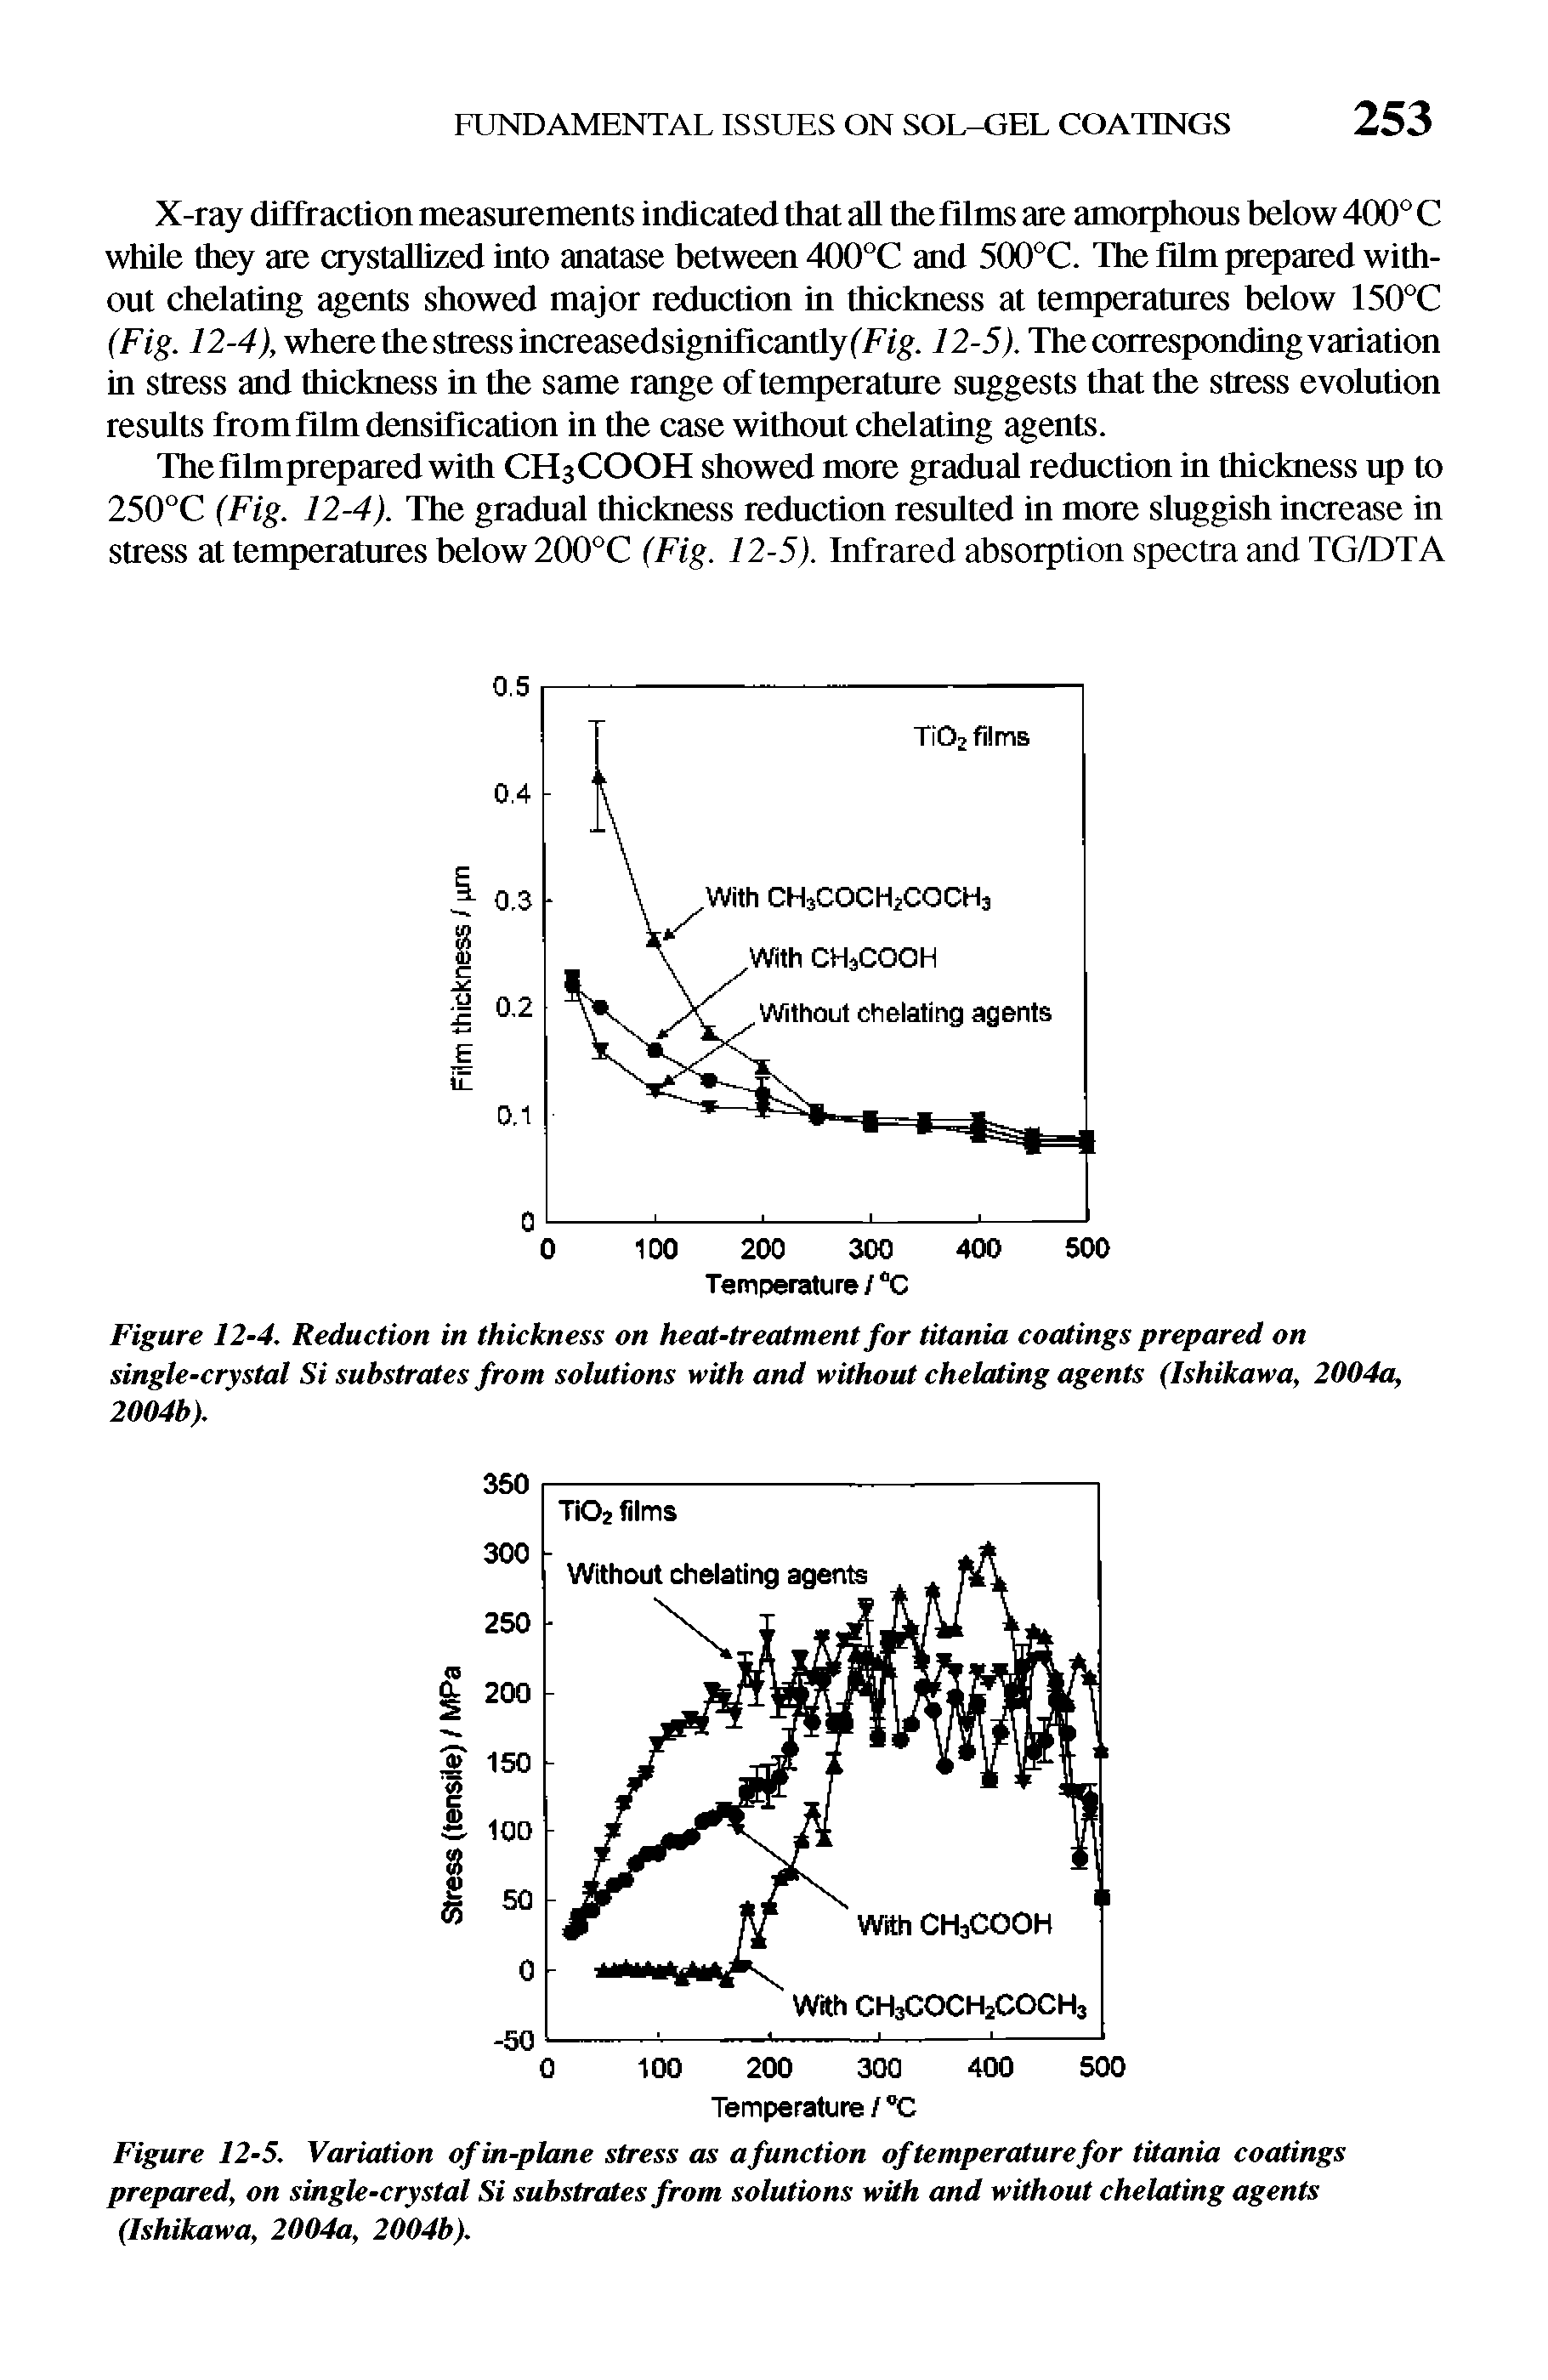 Figure 12-4. Reduction in thickness on heat-treatment for titania coatings prepared on single-crystal Si substrates from solutions with and without chelating agents (Ishikawa, 2004a, 2004b).